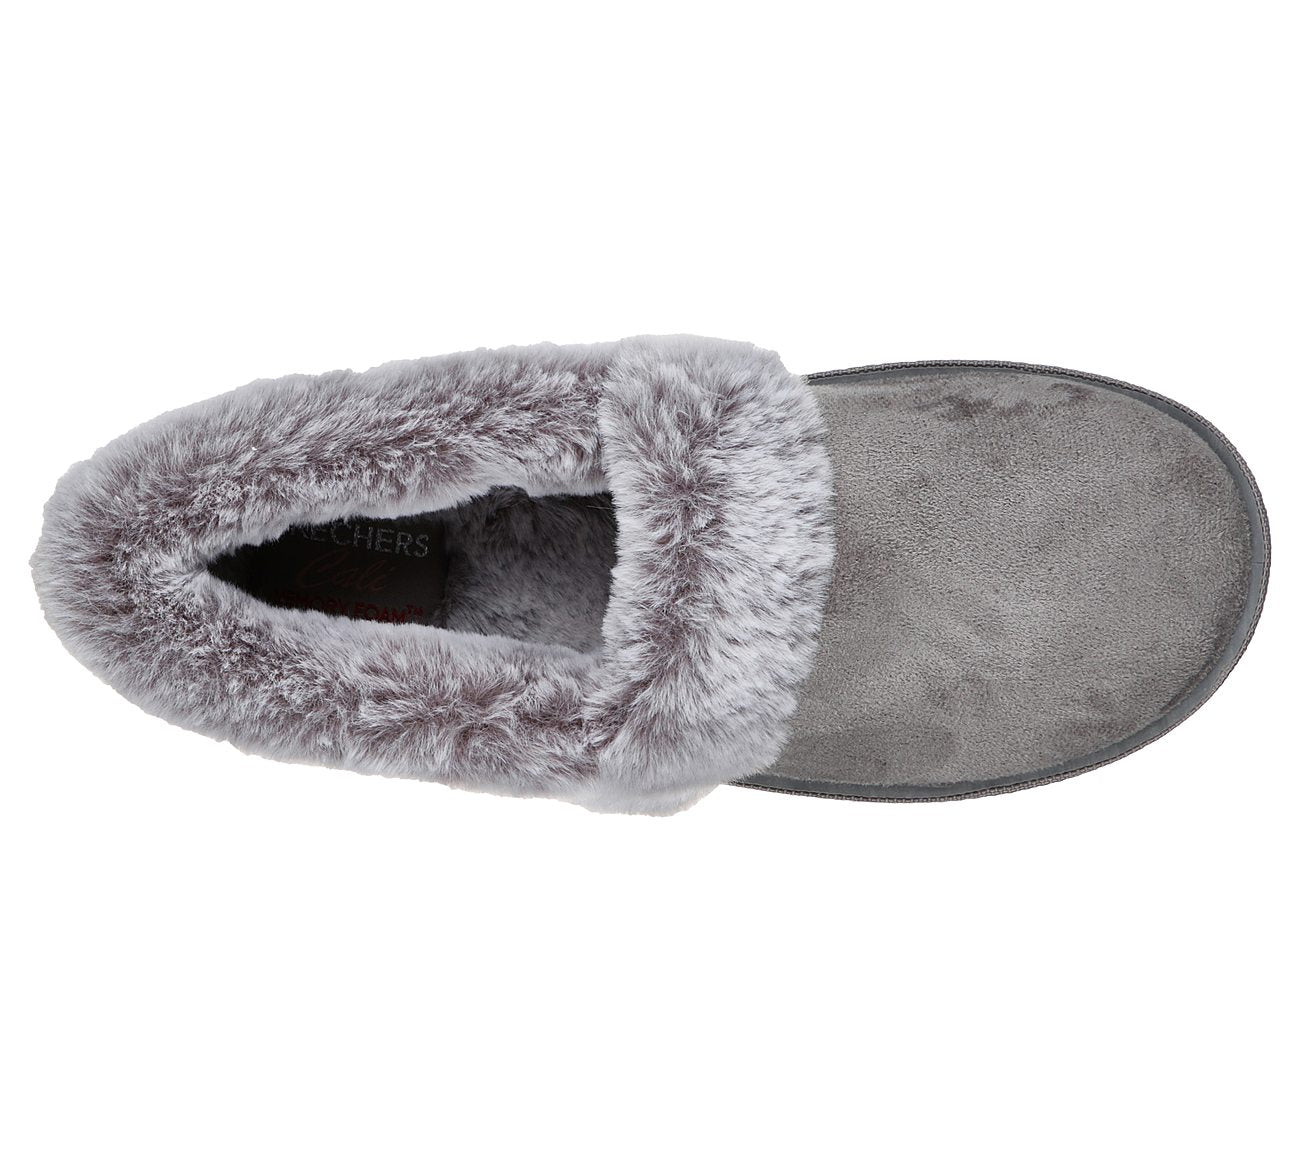 Skechers 32777 Cozy Campfire Team Toasty Ladies Charcoal Slippers